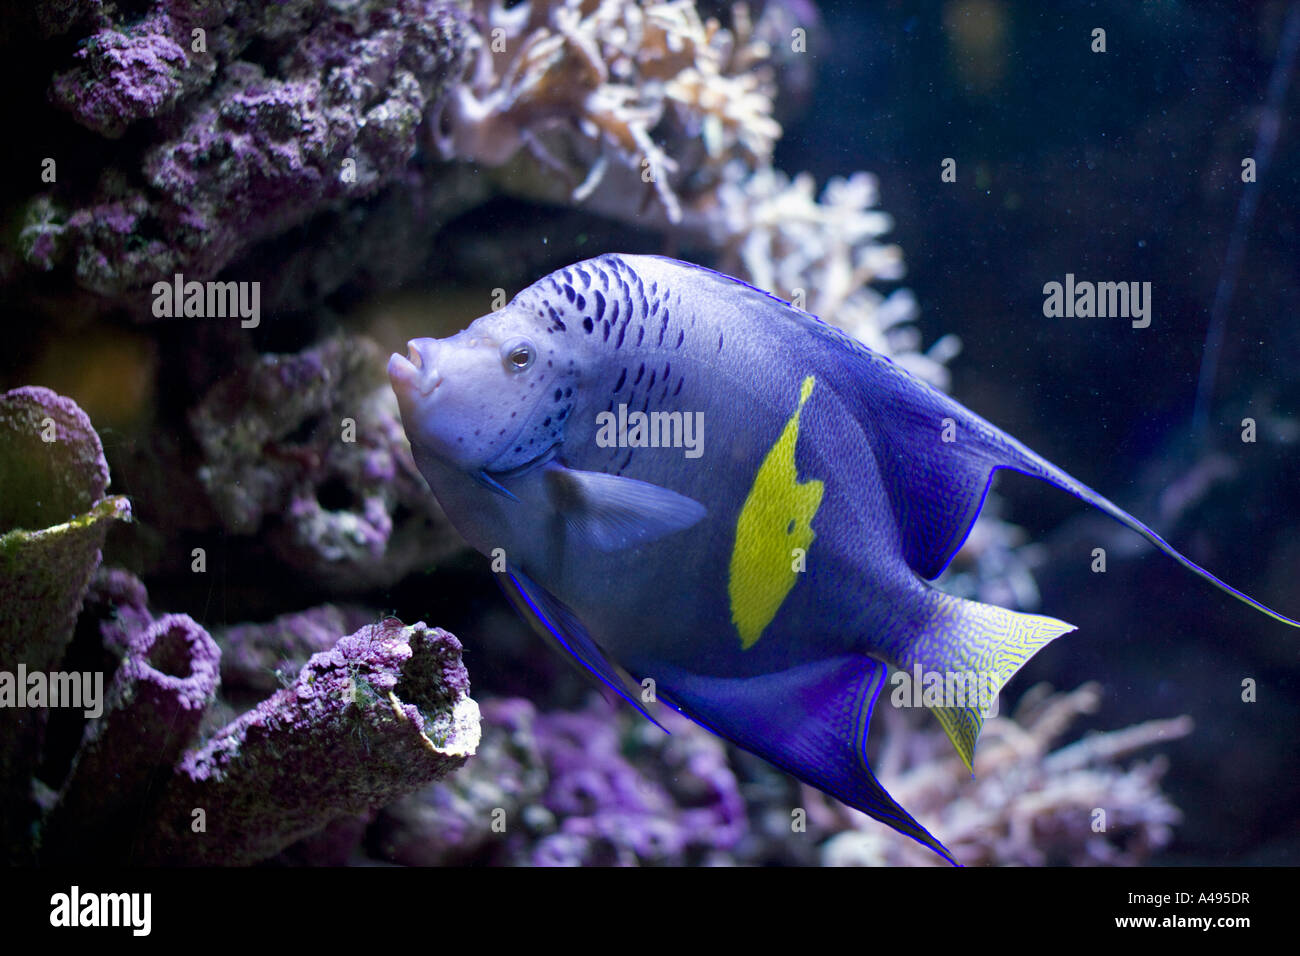 Blue Moon Angelfish Pomacanthus maculosus () Banque D'Images